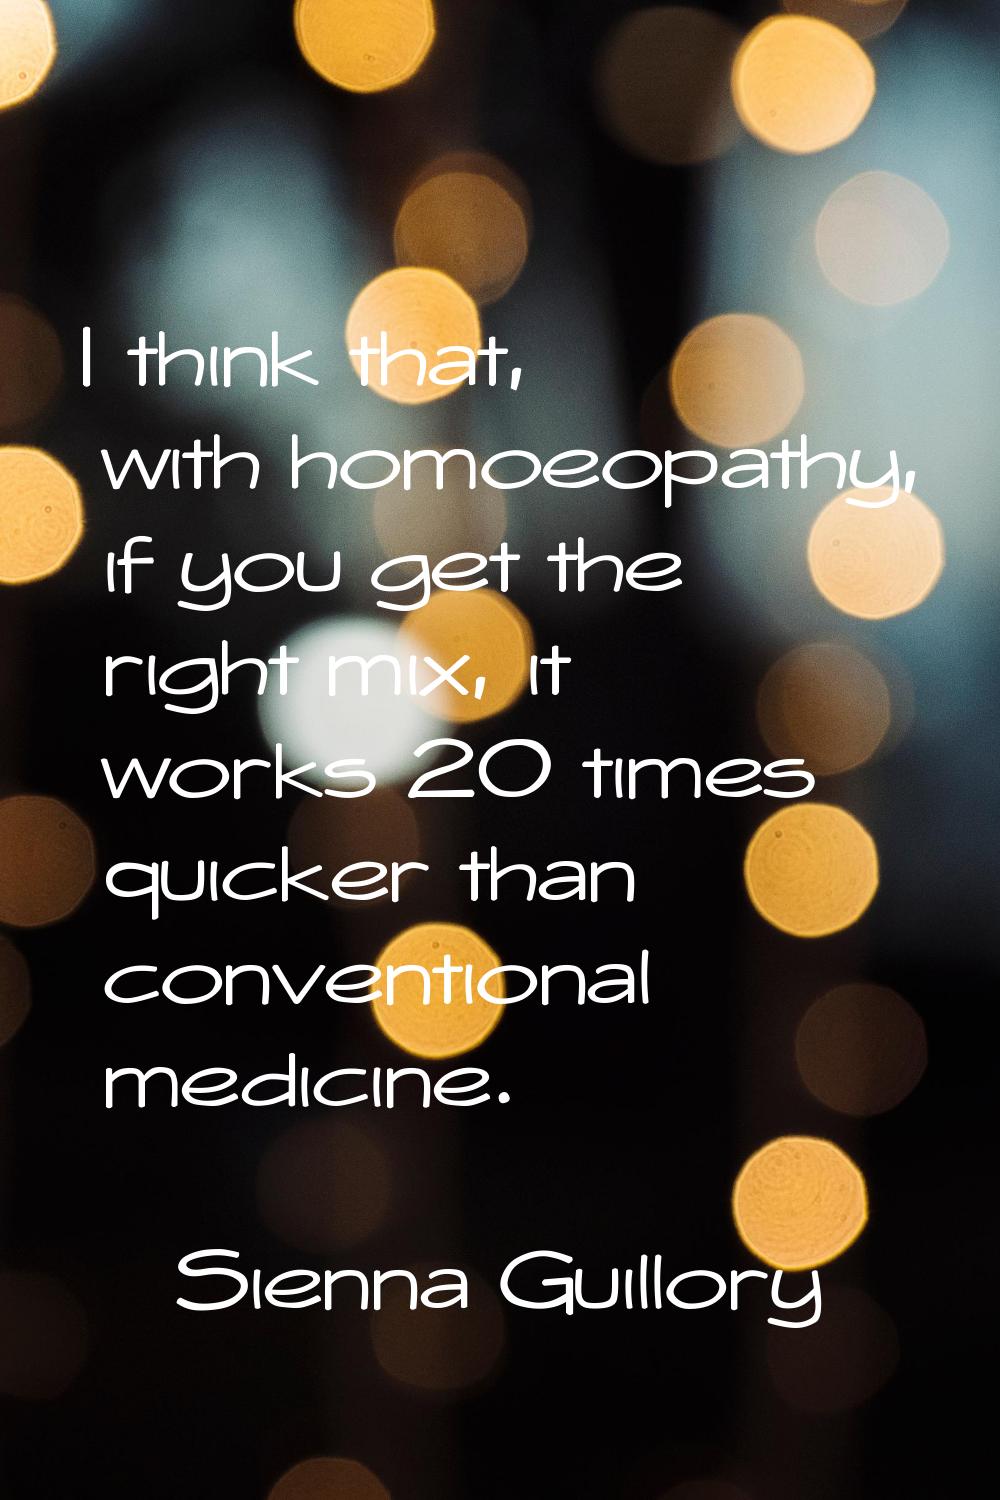 I think that, with homoeopathy, if you get the right mix, it works 20 times quicker than convention